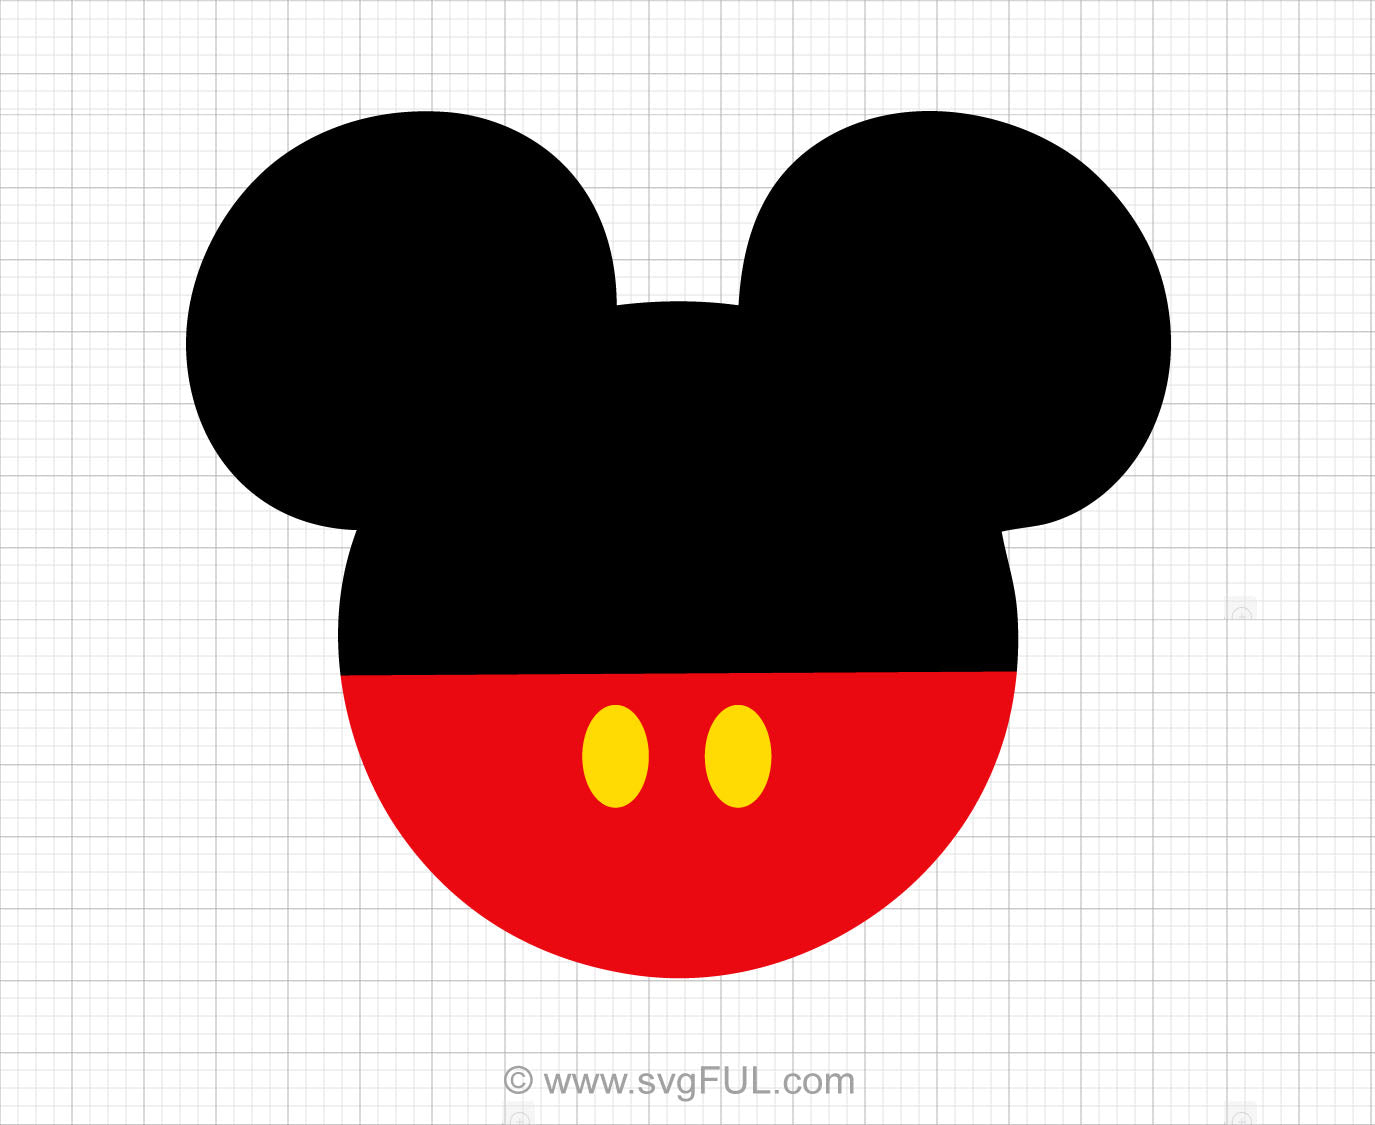 Svg Mickey Mouse Free - 127+ Best Free SVG File